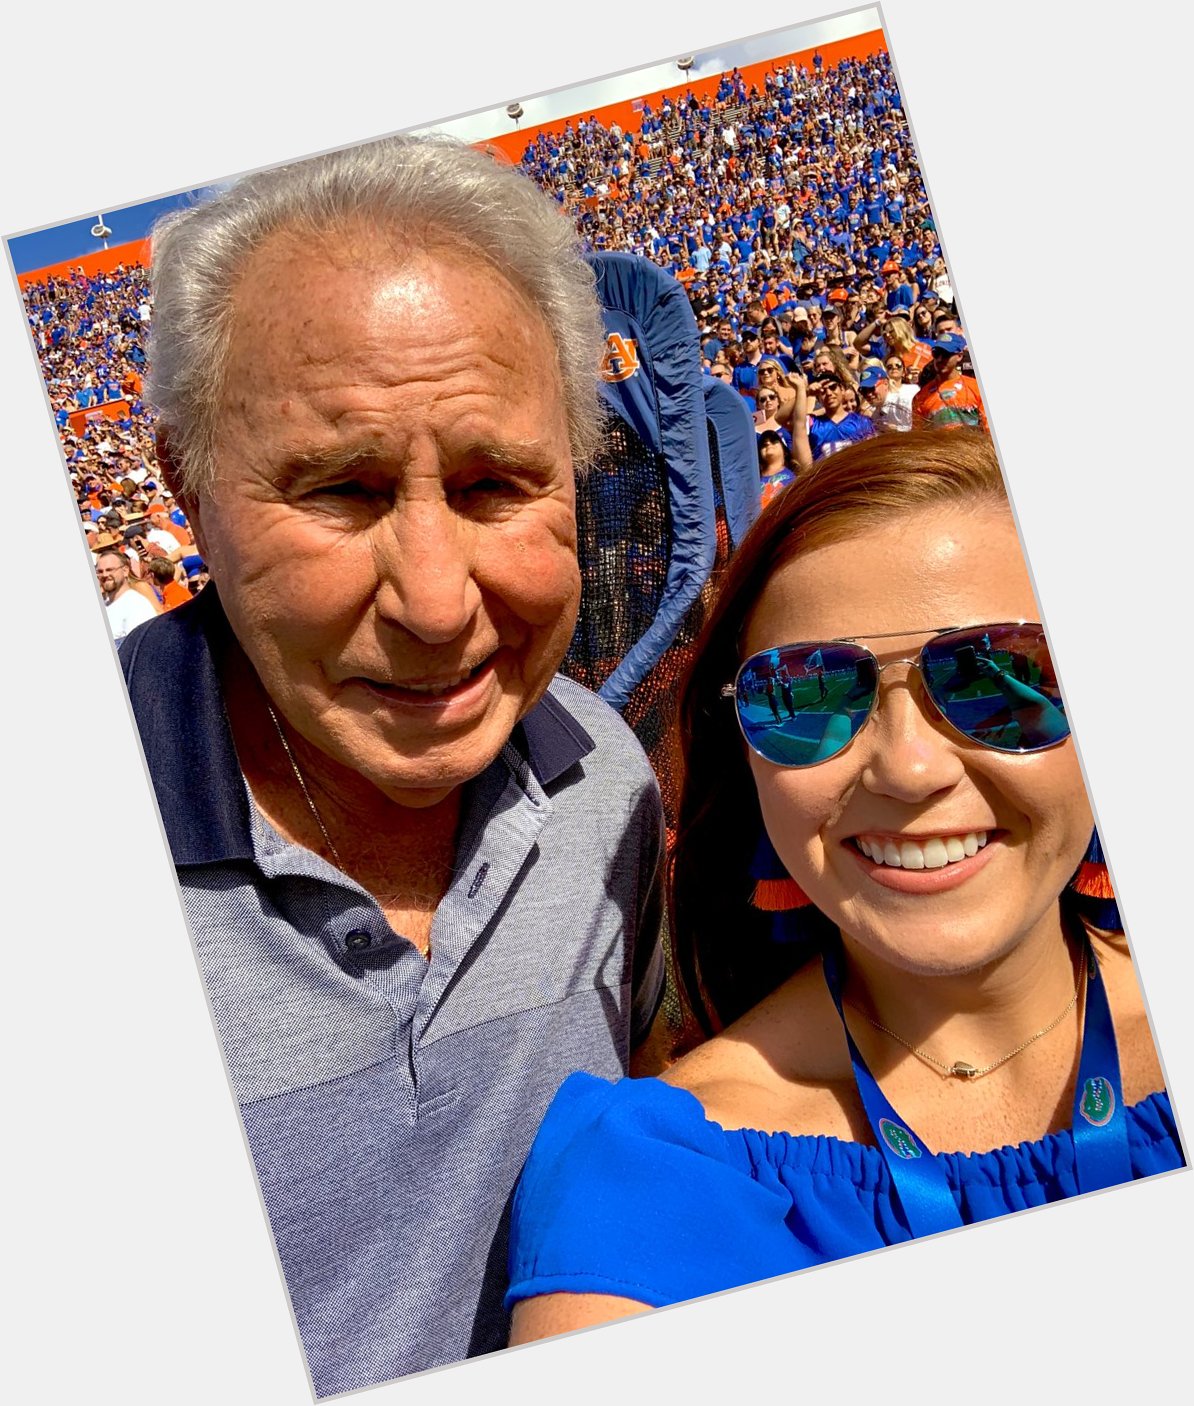 Happy bday Lee Corso!! Of course I asked him to take off his FSU hat before this pic  